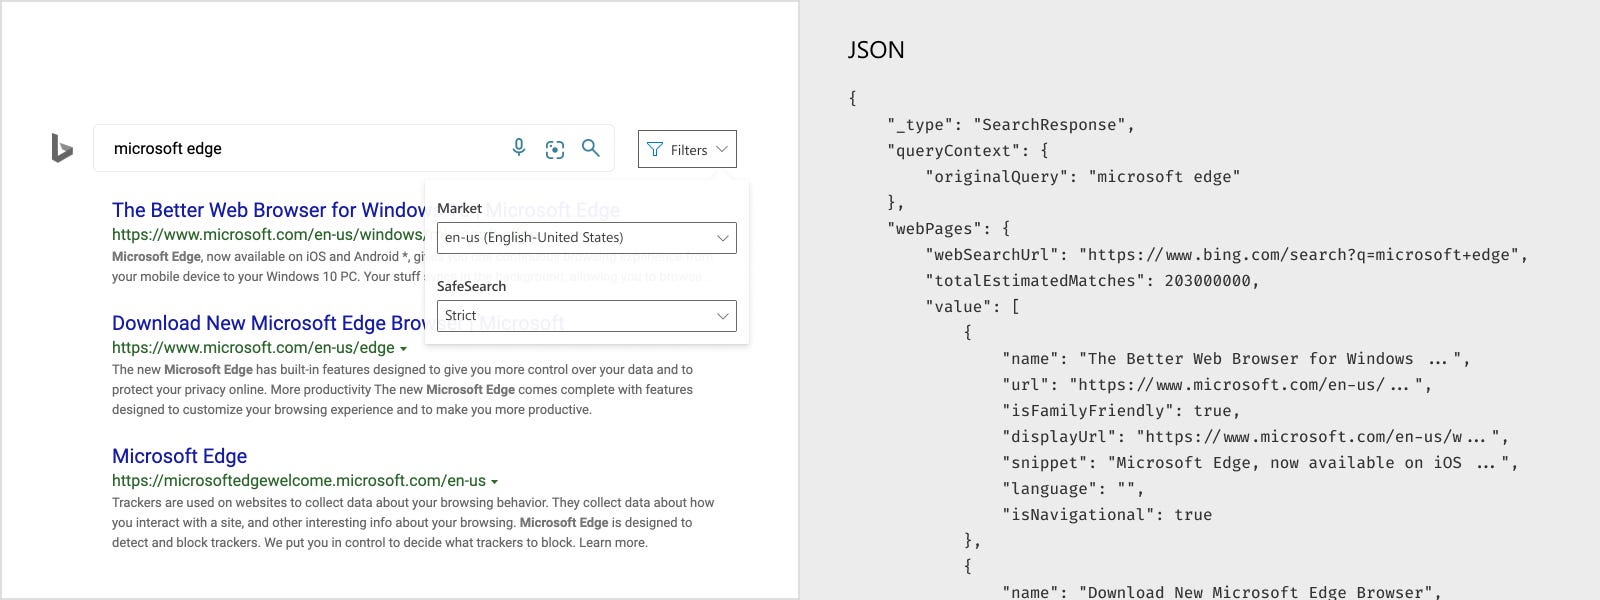 Bing Search API Documentation: Unlock Advanced Search Features